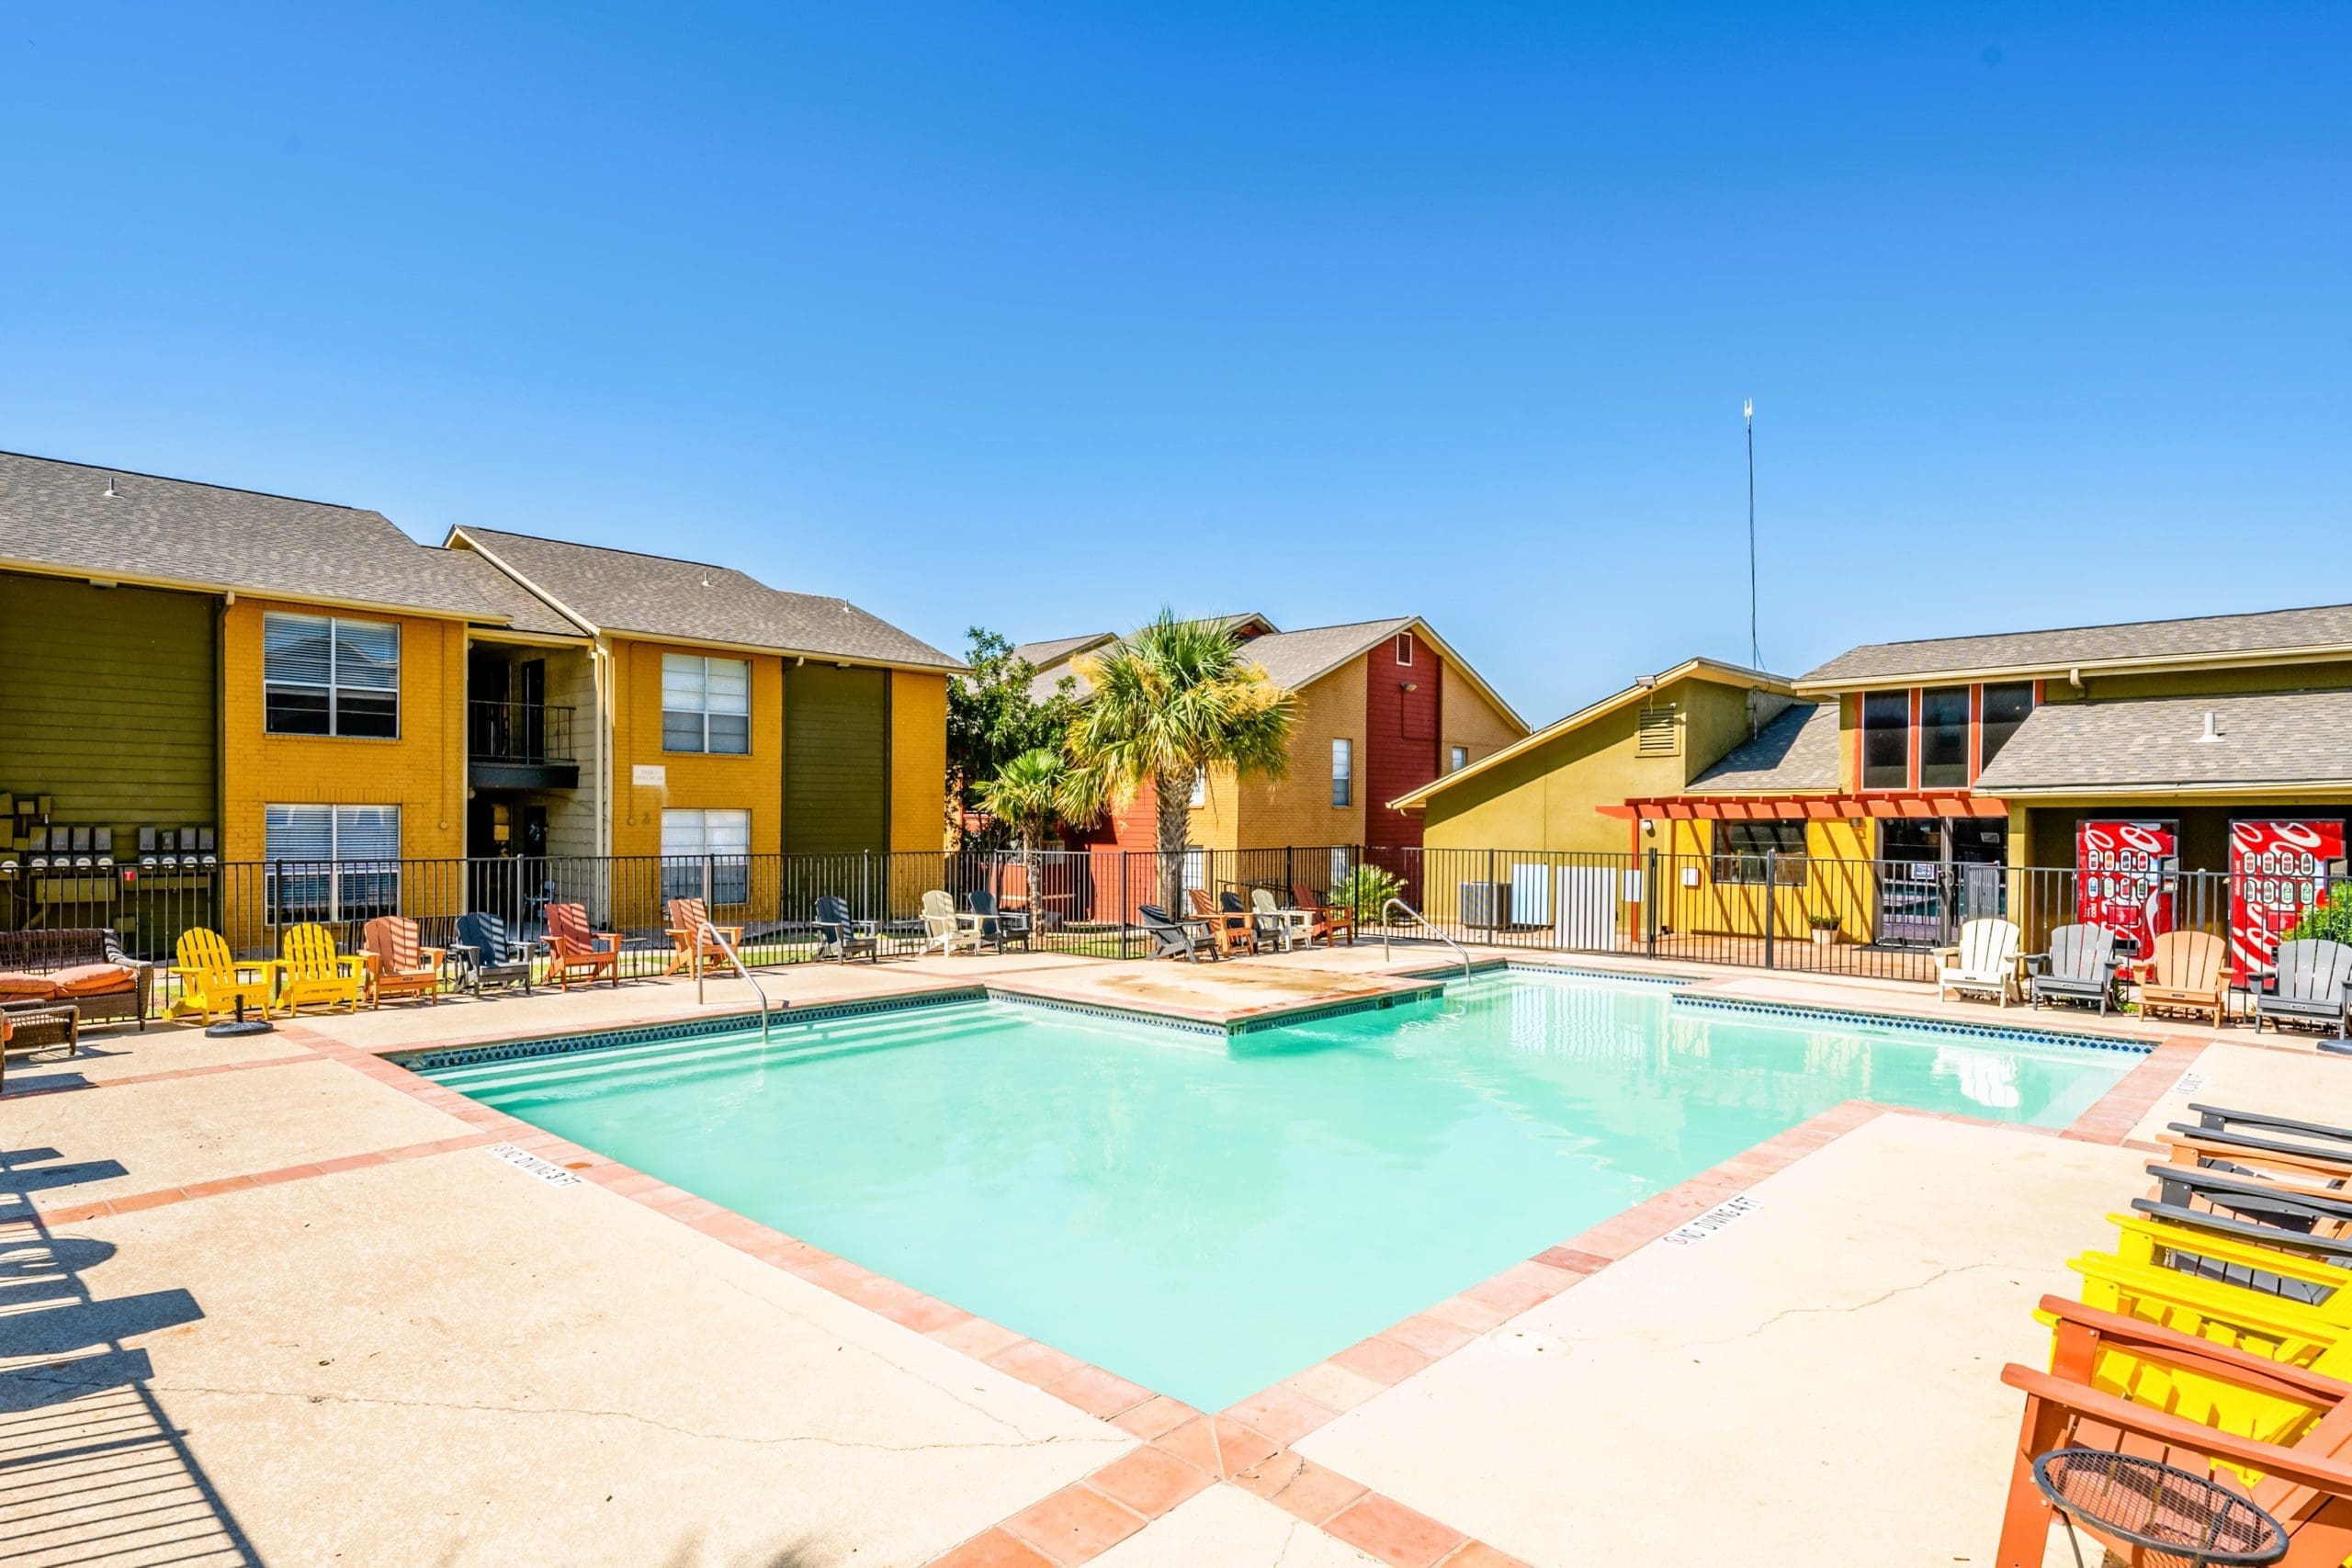 Dog-Friendly Apartments in San Antonio, TX - City-Base Vista - Pool with Lounge Chairs and View of Apartment Buildings